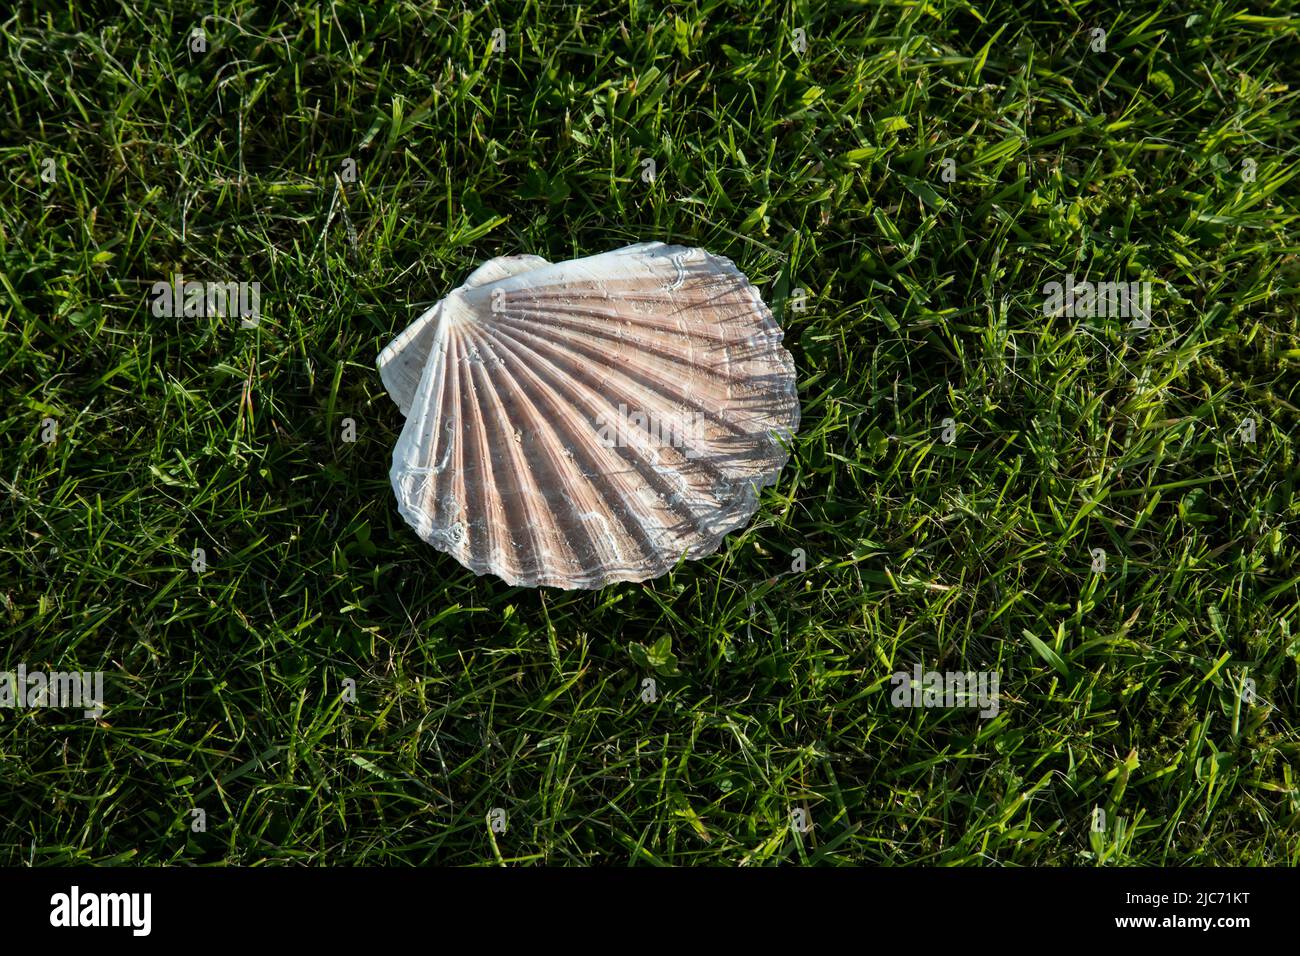 Large single white empty Atlantic Scallop shell on a lush residential green lawn in North Uist, Outer Hebrides, where scallops are farmed. Stock Photo